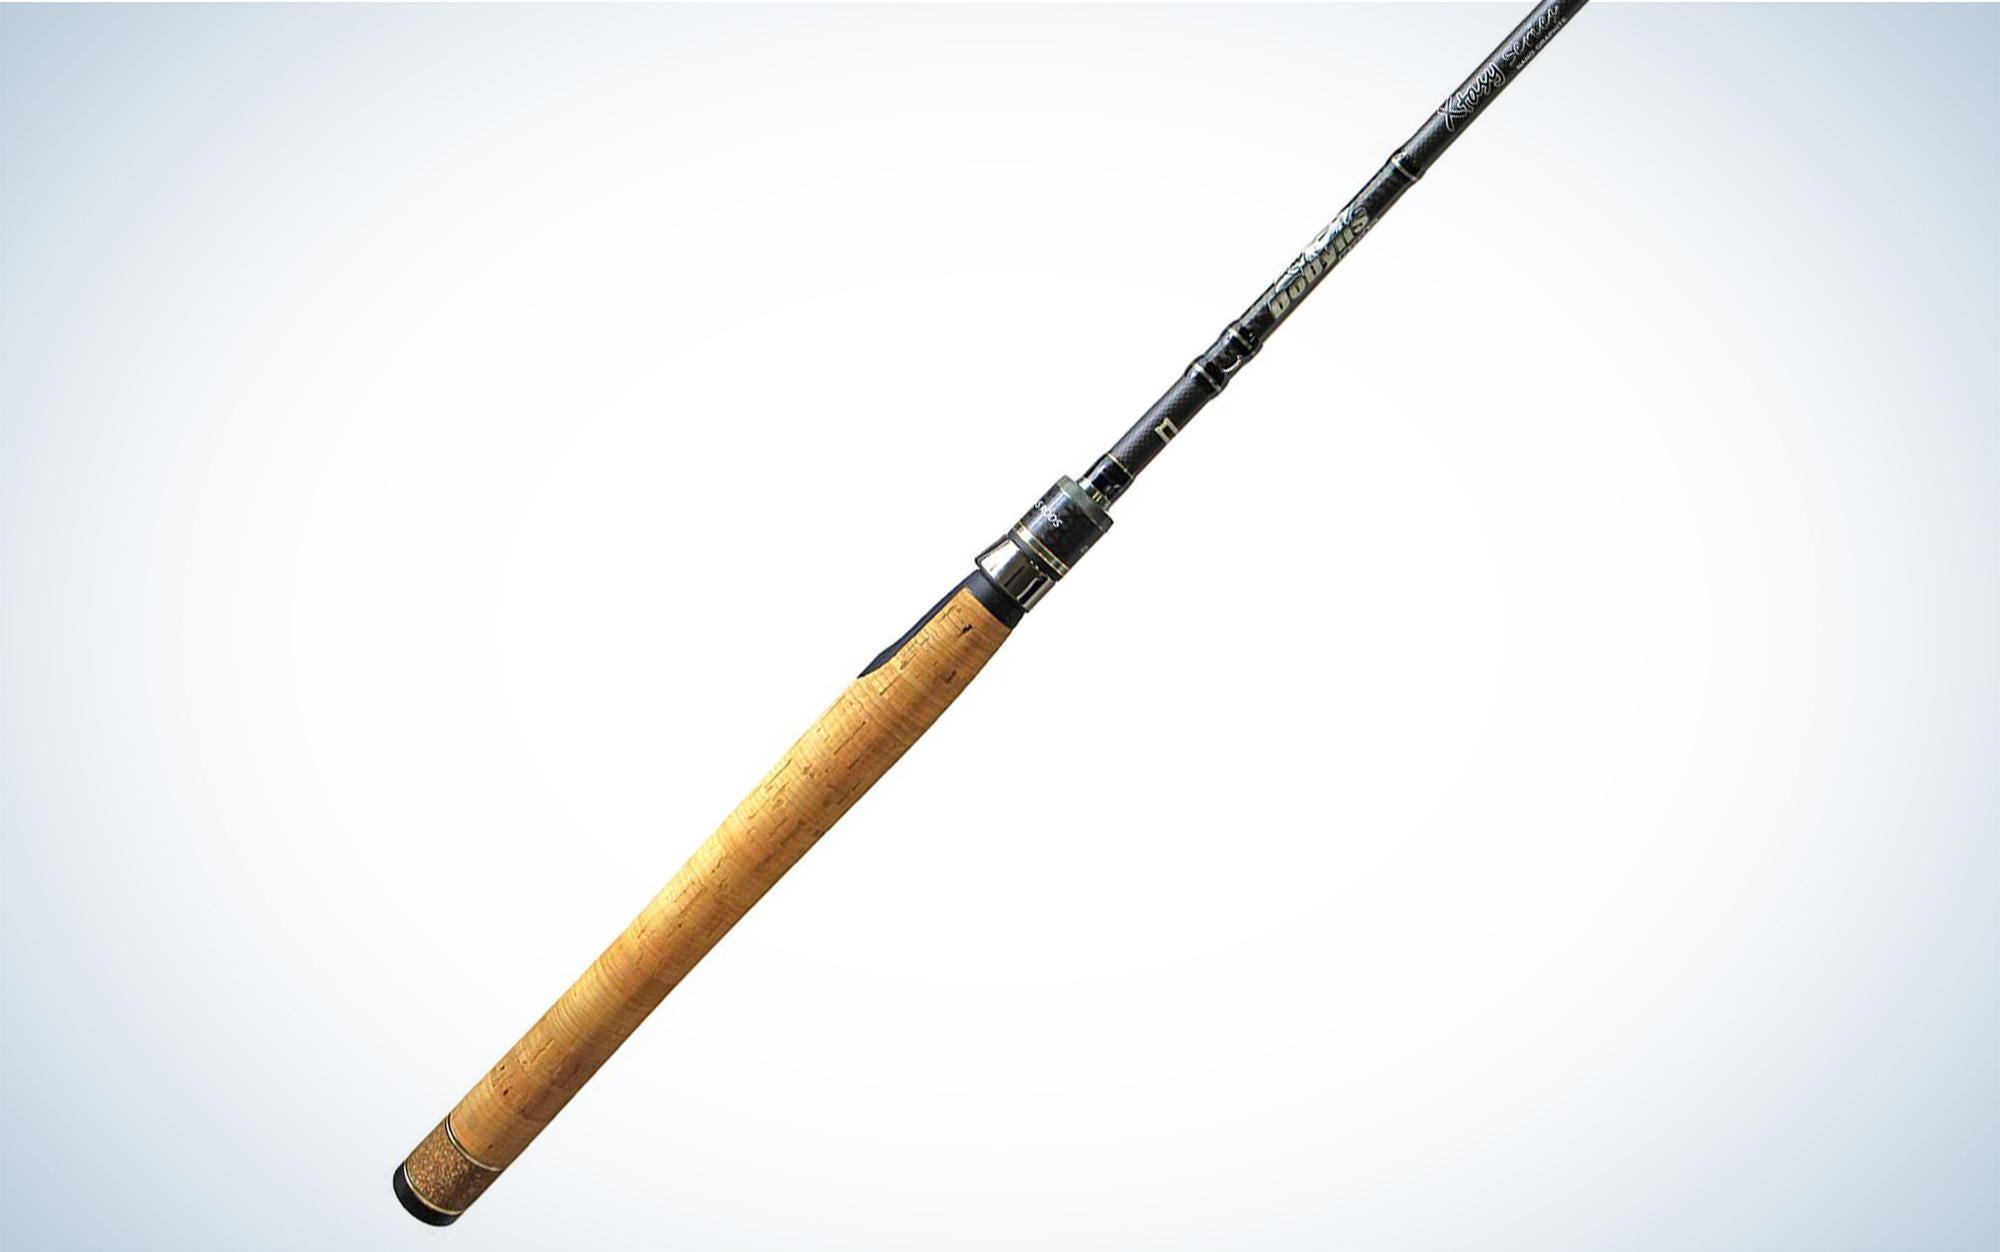 What is the best possible fishing gear a player can reasonably